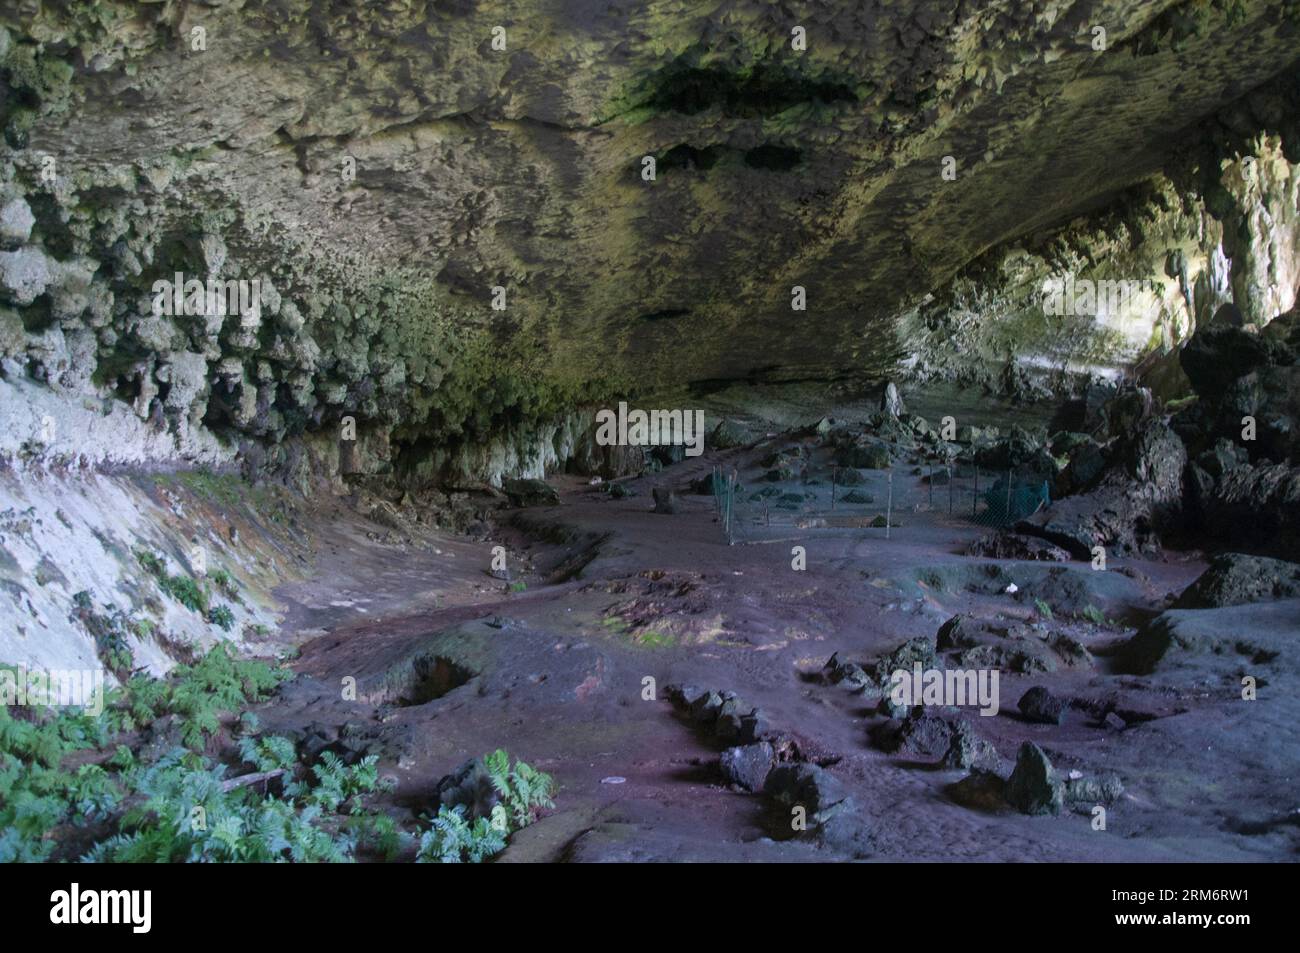 Ancient human remains have been found within the Niah Caves, which now form a national park and World Heritage Site in Sarawak, Malaysian Borneo Stock Photo